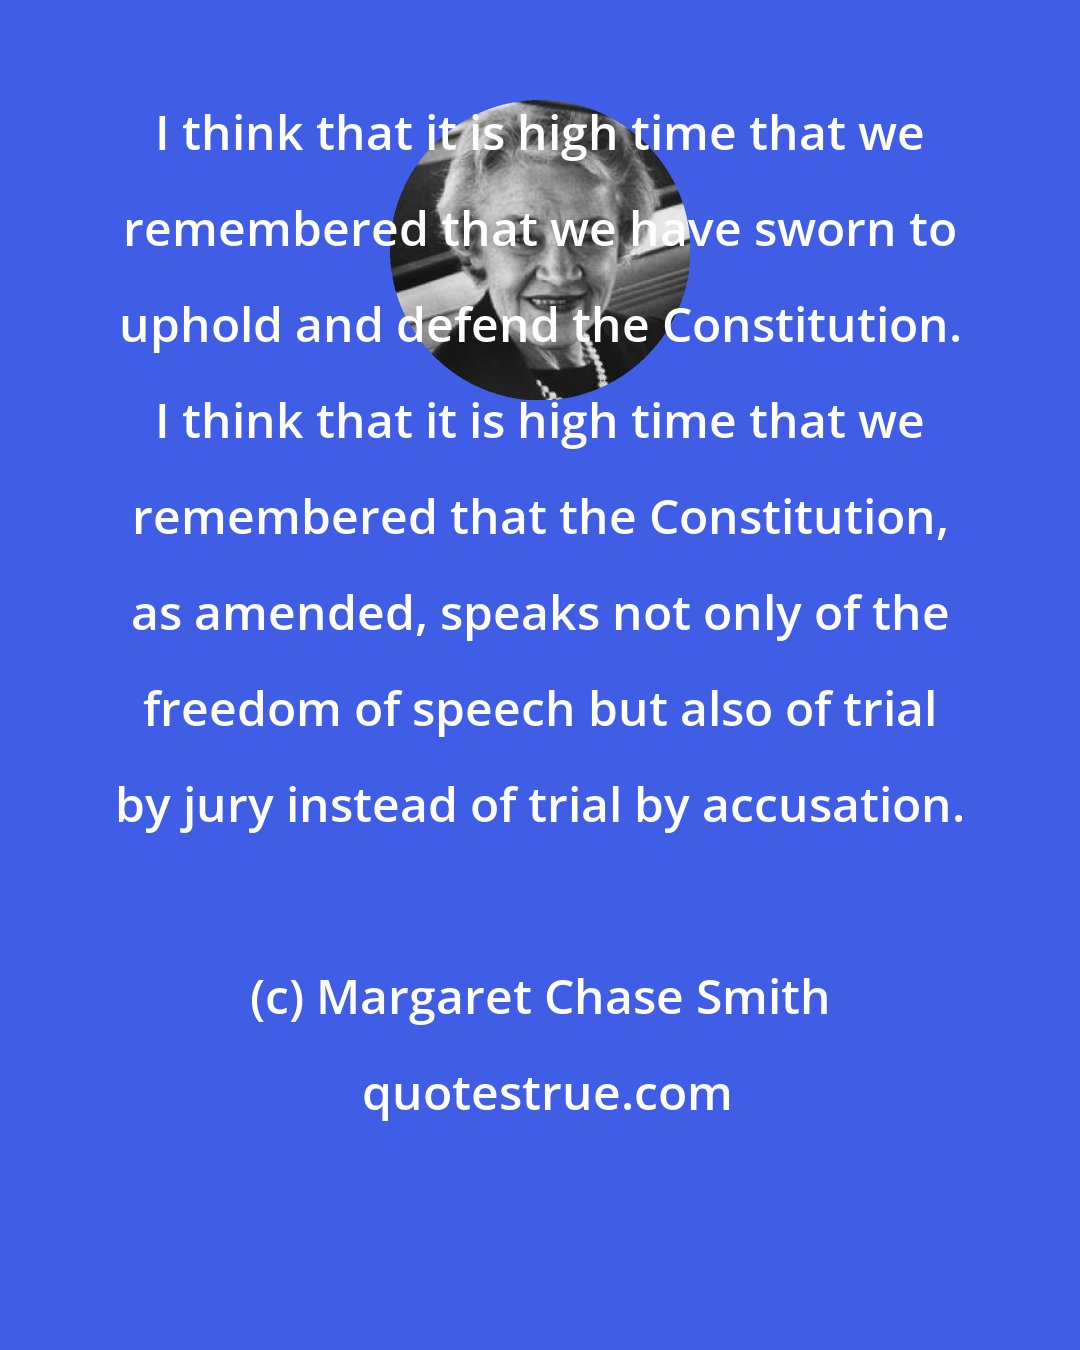 Margaret Chase Smith: I think that it is high time that we remembered that we have sworn to uphold and defend the Constitution. I think that it is high time that we remembered that the Constitution, as amended, speaks not only of the freedom of speech but also of trial by jury instead of trial by accusation.